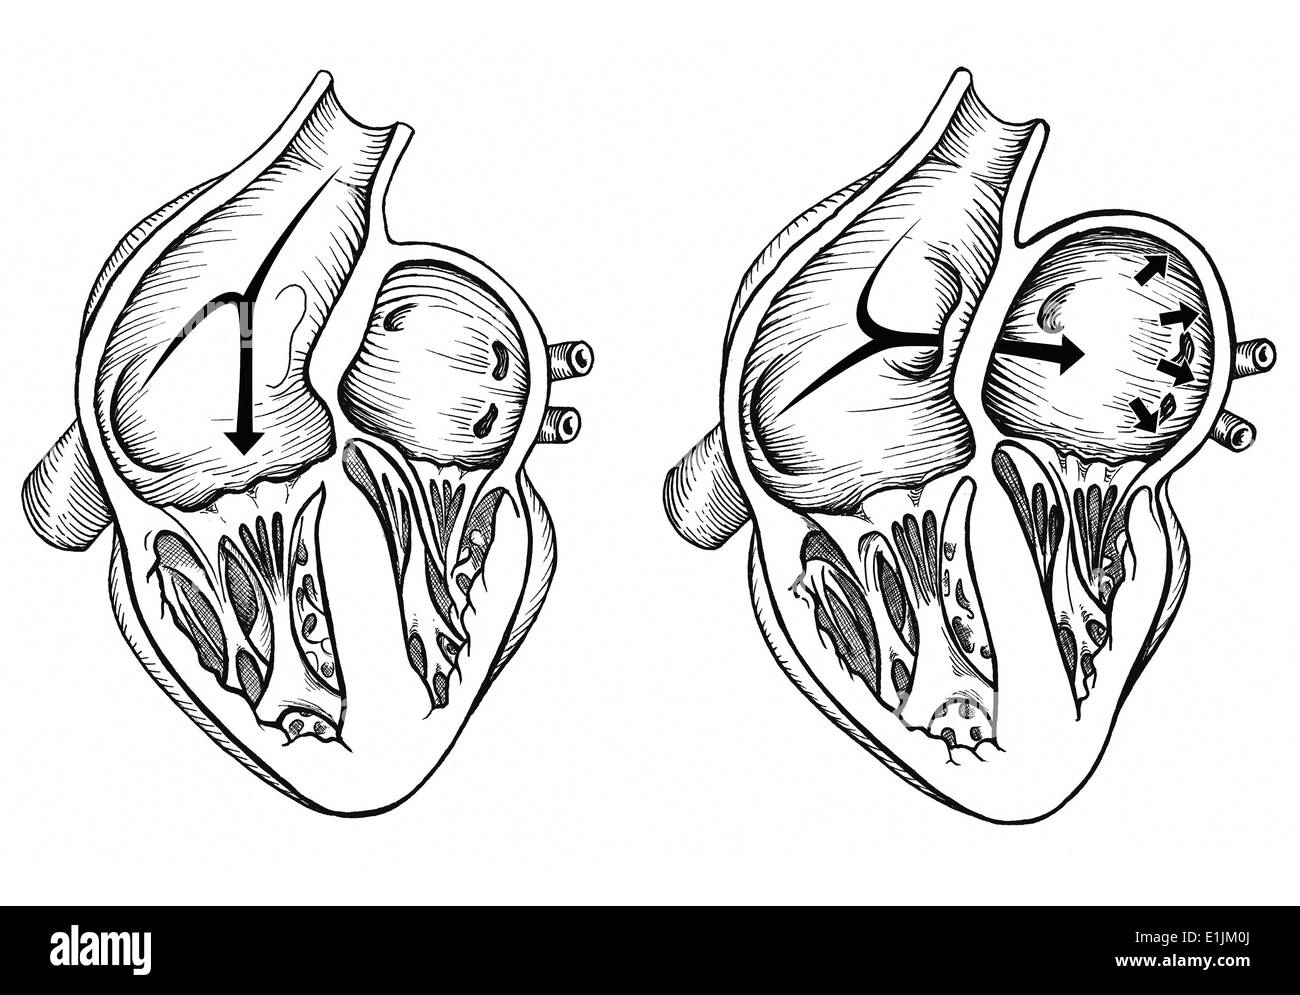 Comparison of normal heart versus heart with a patent foramen ovale. Stock Photo